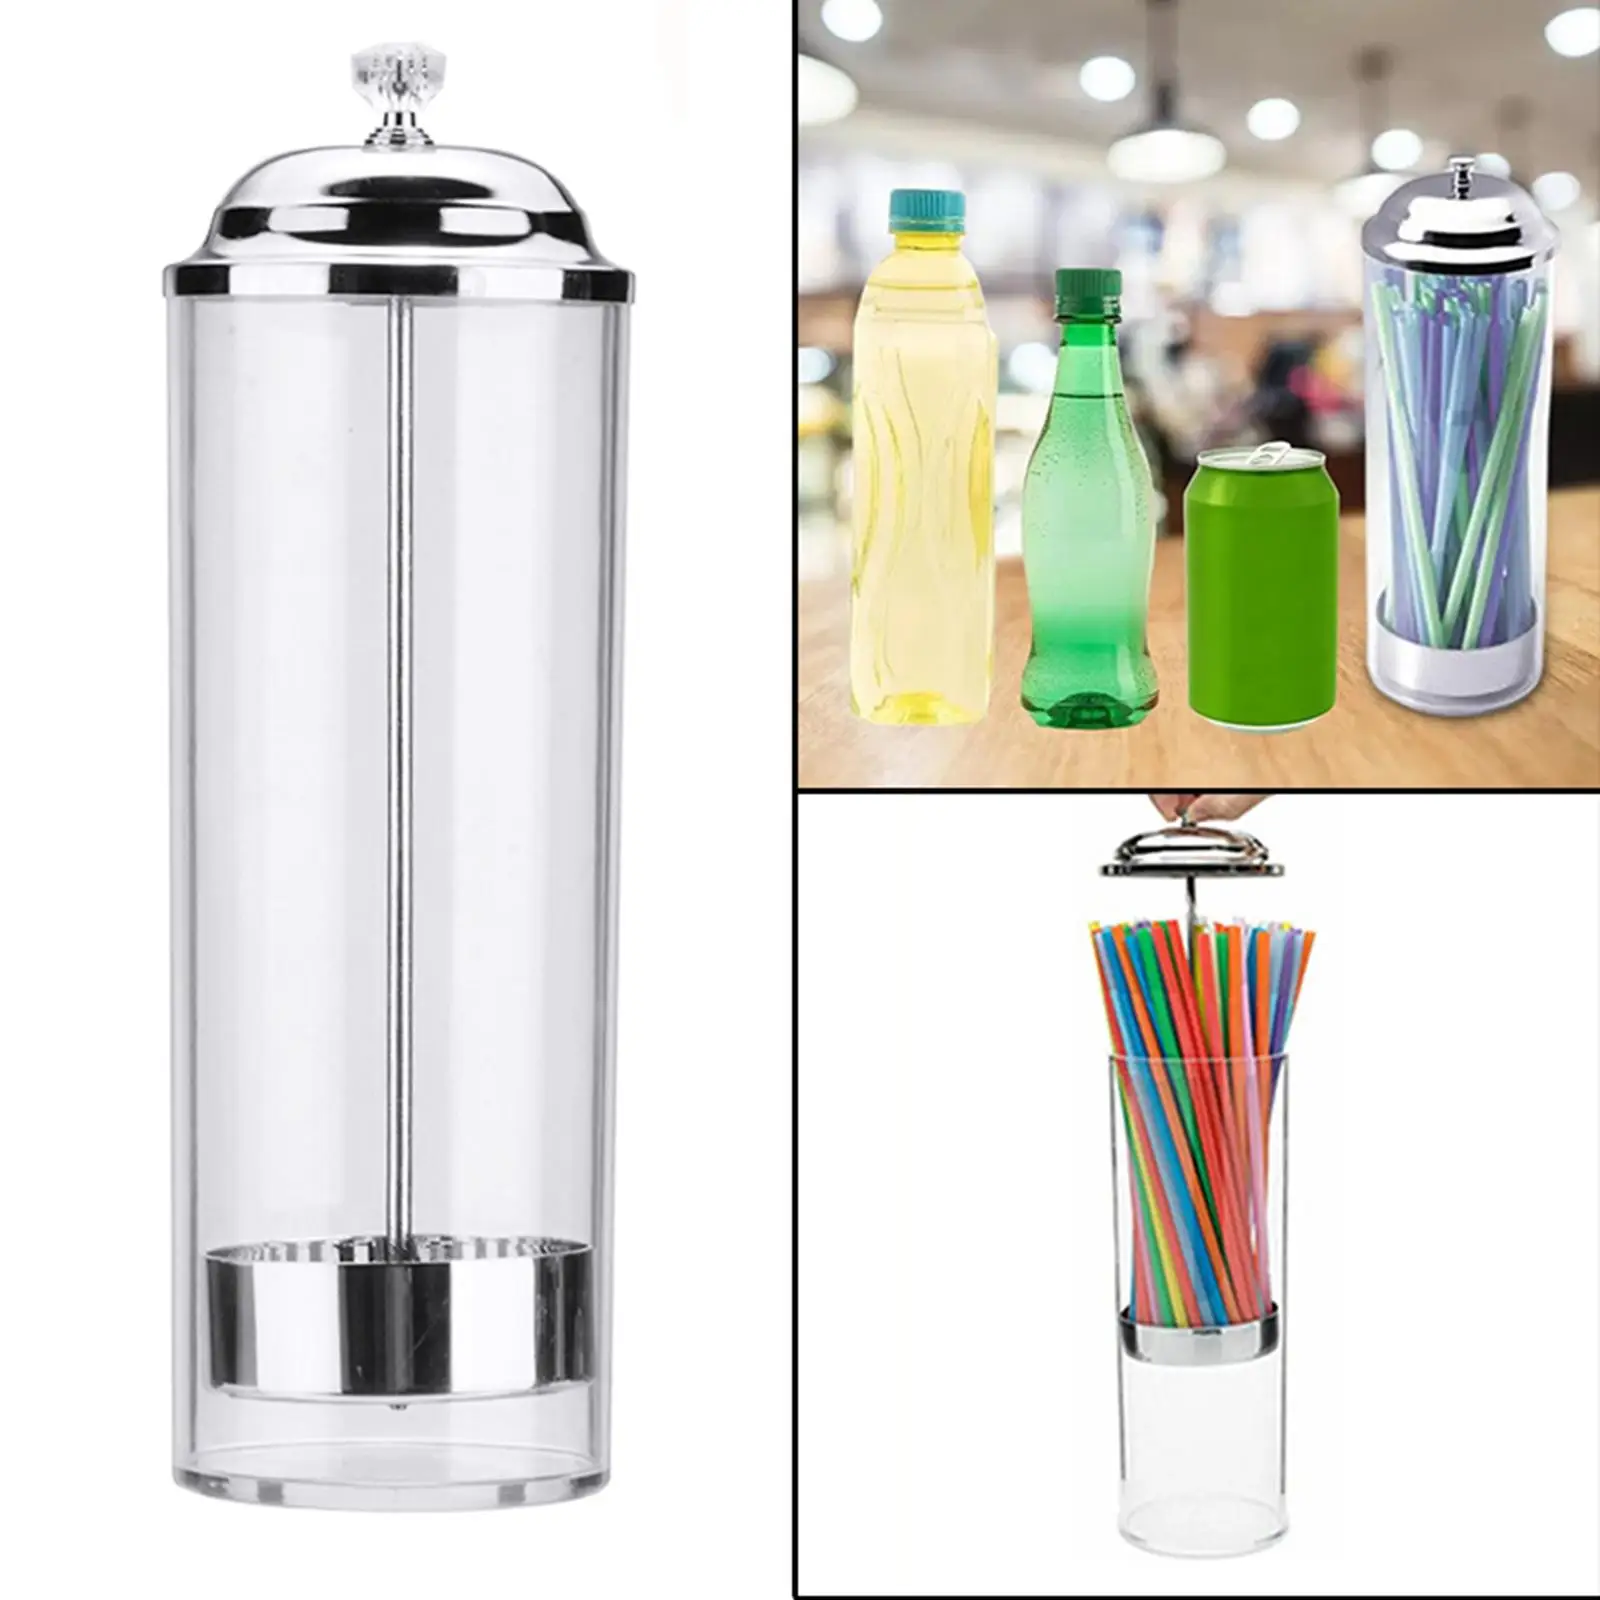 Straw Dispenser Holders Plastic Straws Dispenser Holders Containers Retro Vintage Paper Tables Bar Kitchen